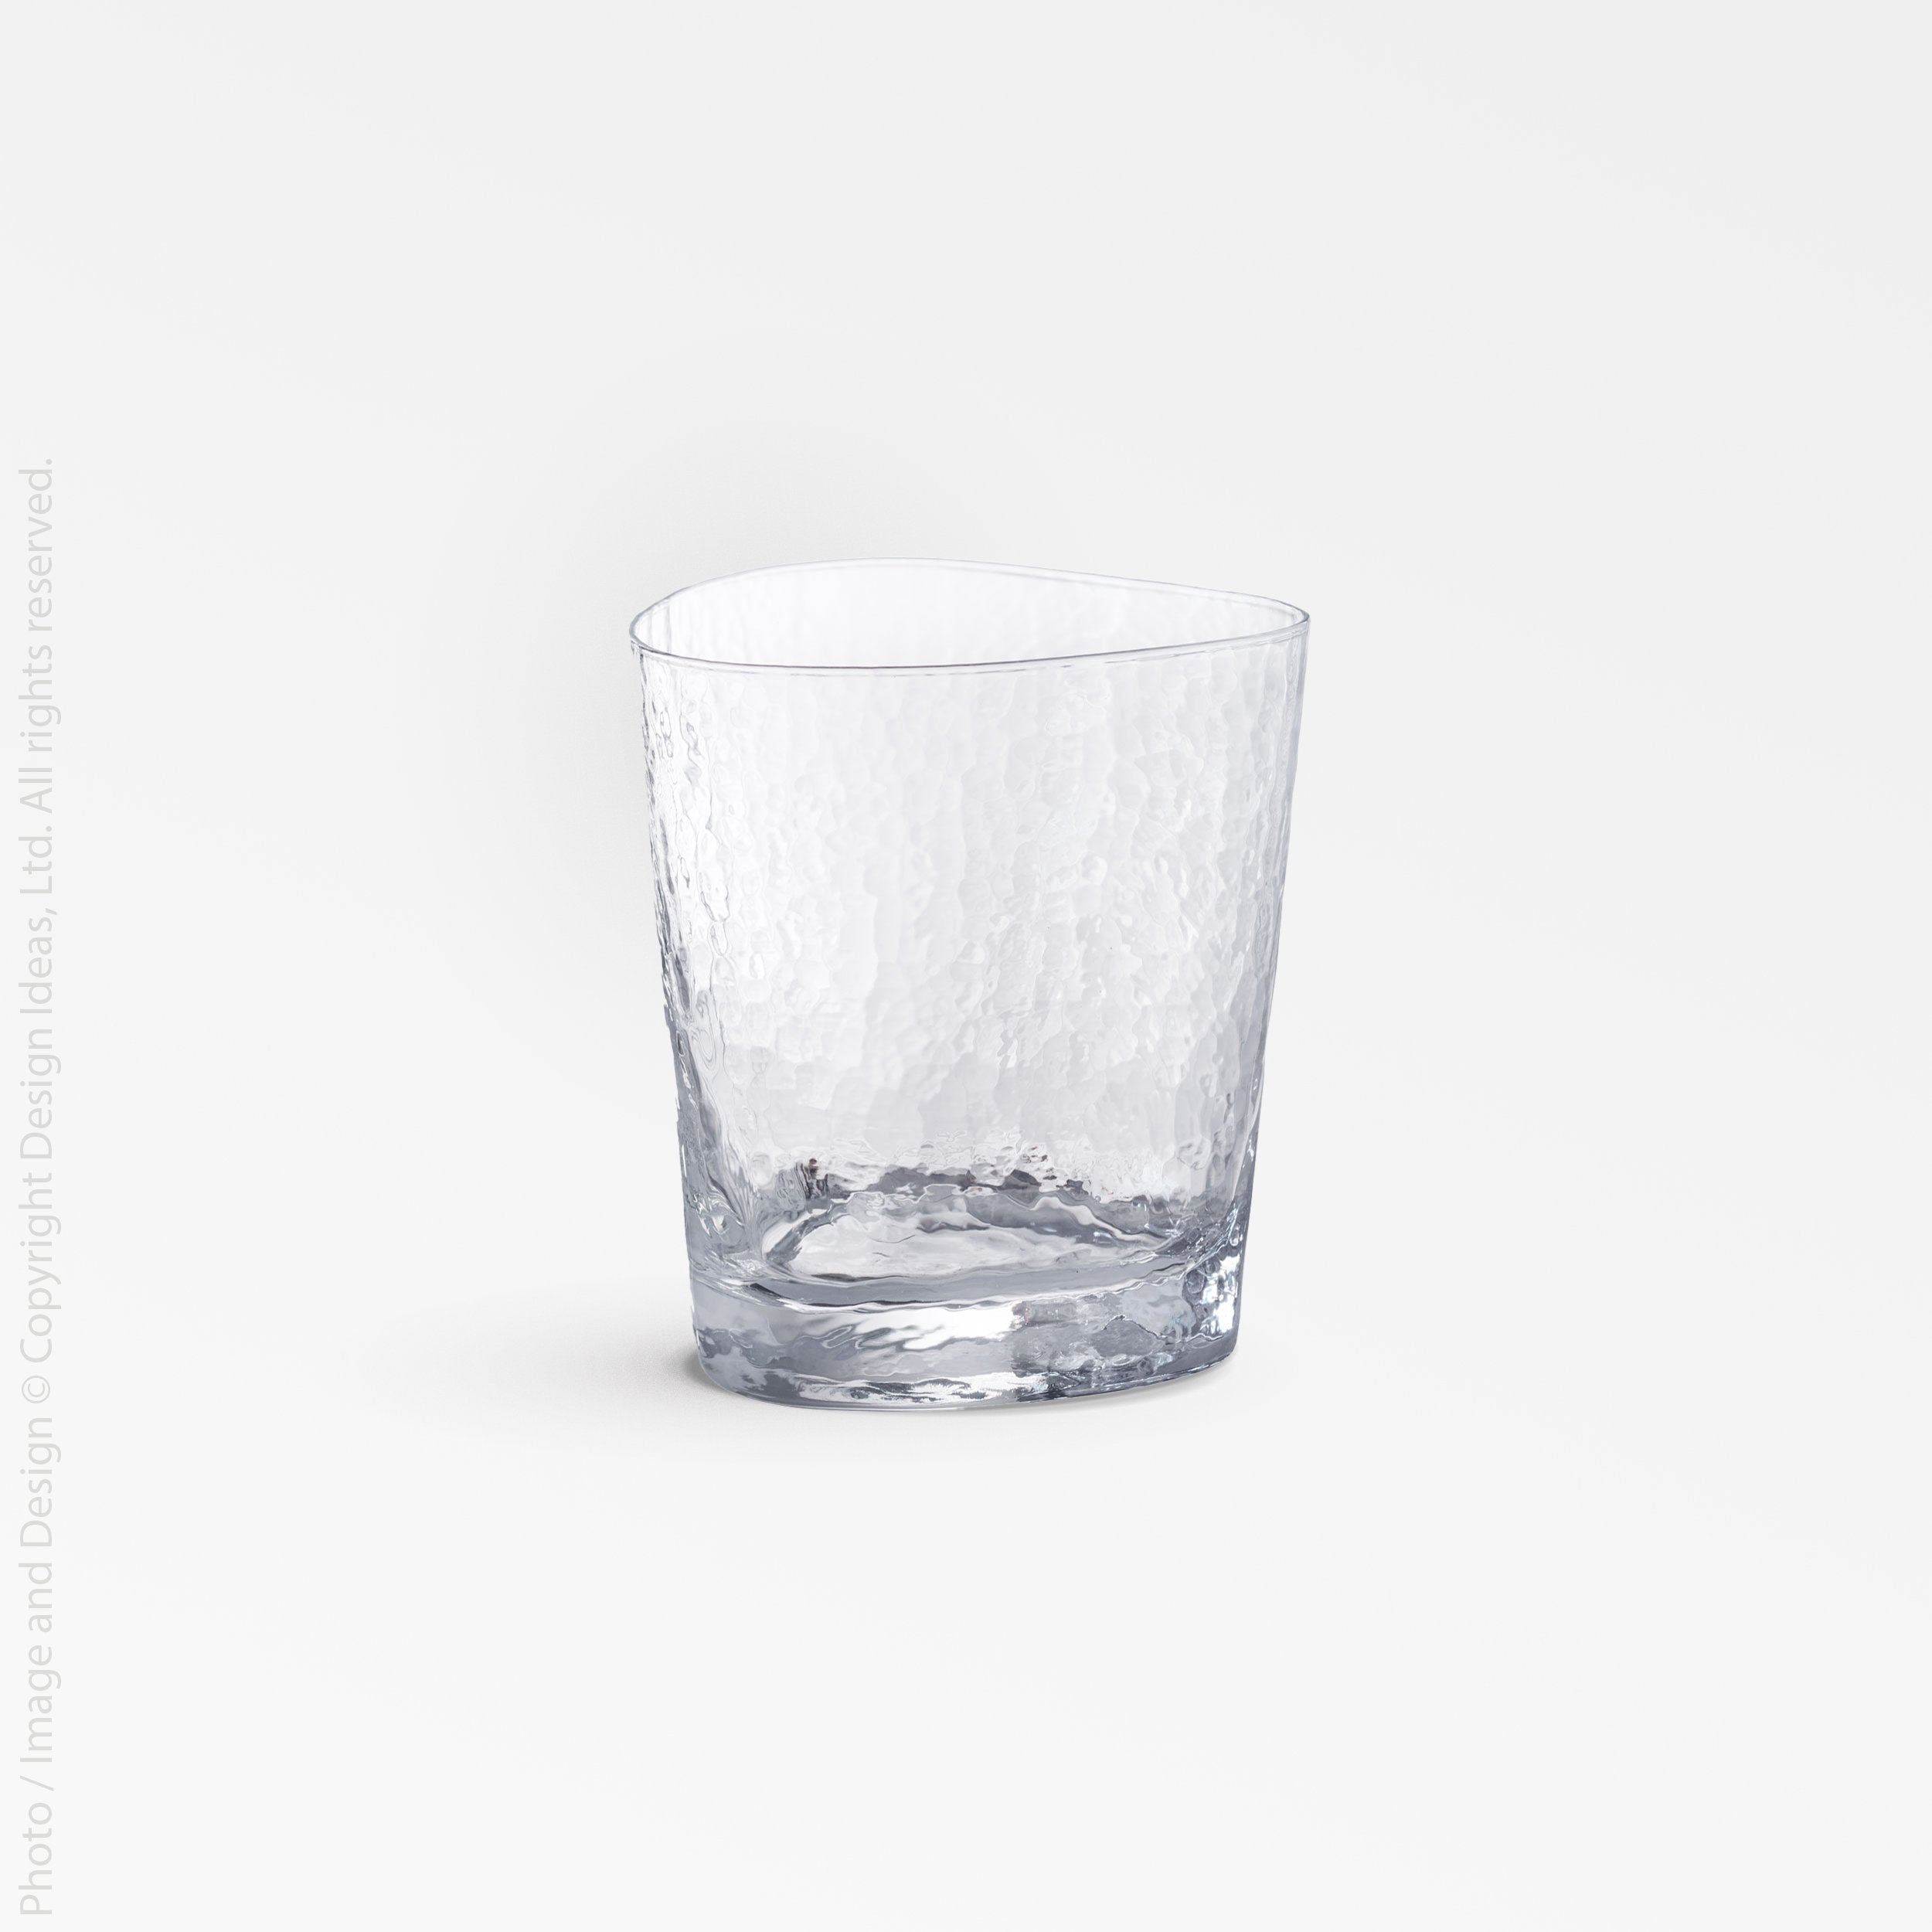 11 Oz/13.5oz Drinking Glasses,clear Tall Glass Cups for Water